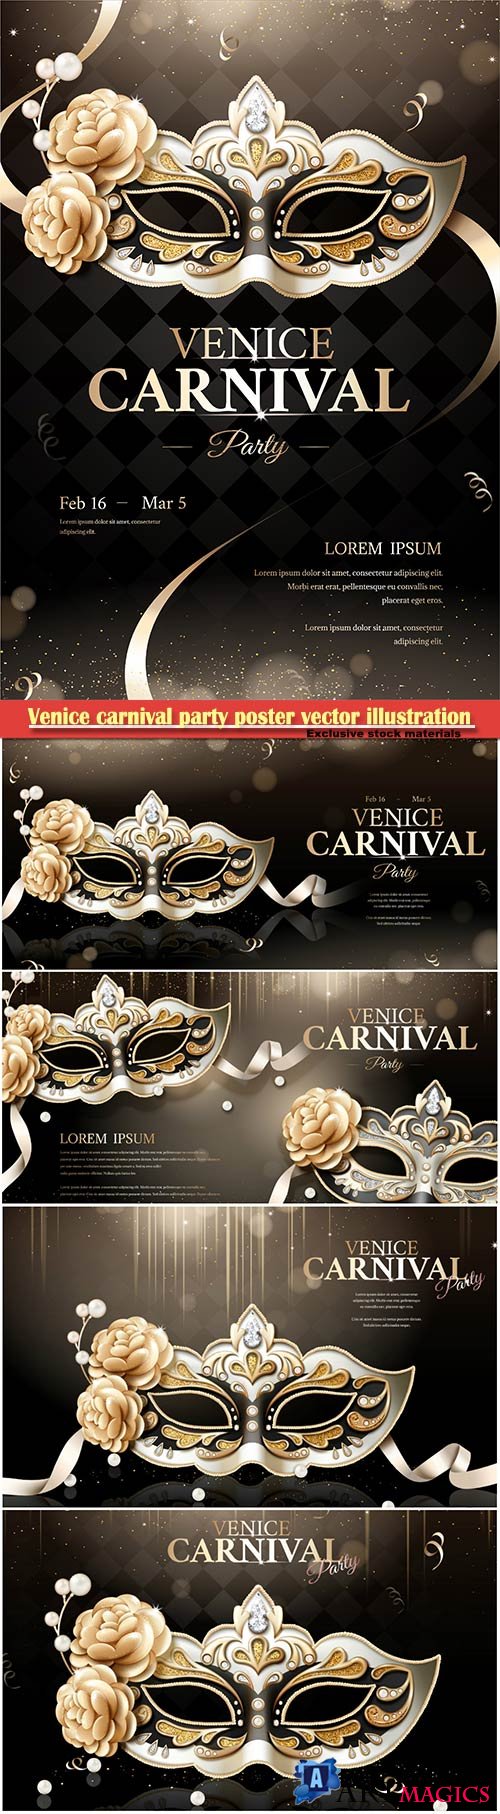 Venice carnival party poster vector illustration